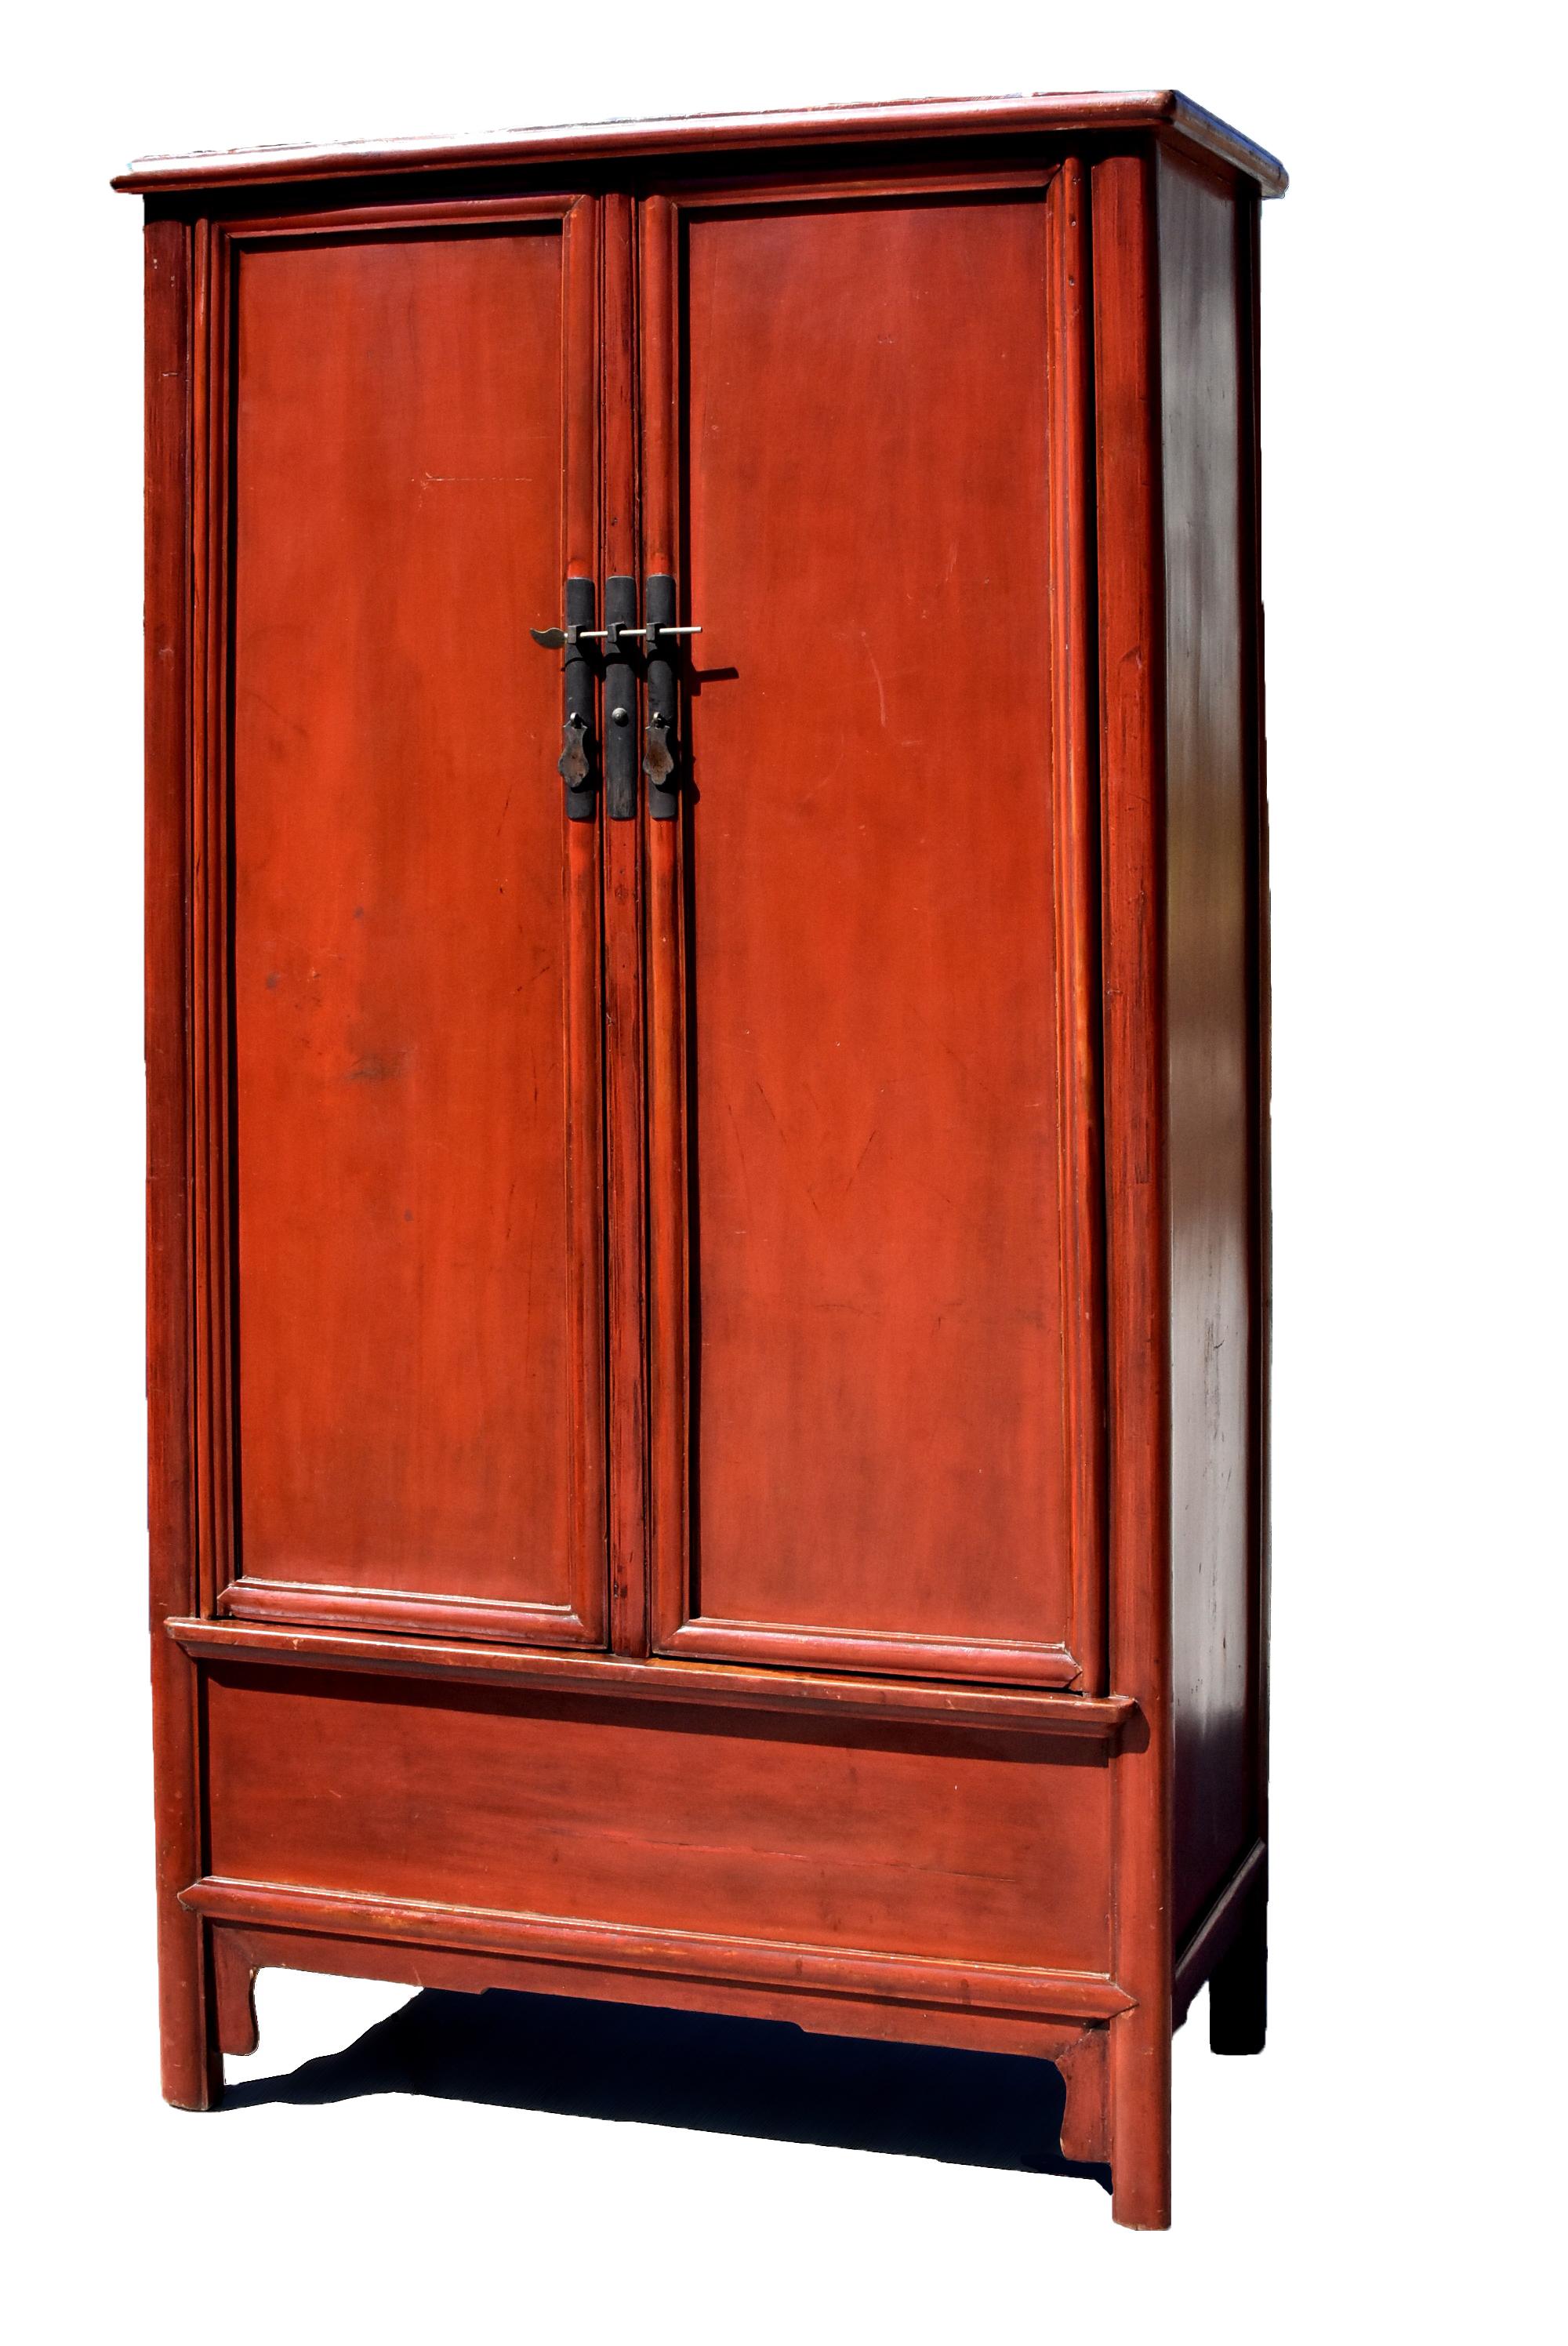 A highly sophisticated, beautiful early 19th century round corner cabinet in russet cinnabar. A miter, tenon and mortise construction creates the top which four round, vertical posts at each corner tenon through. Same construction repeats on the